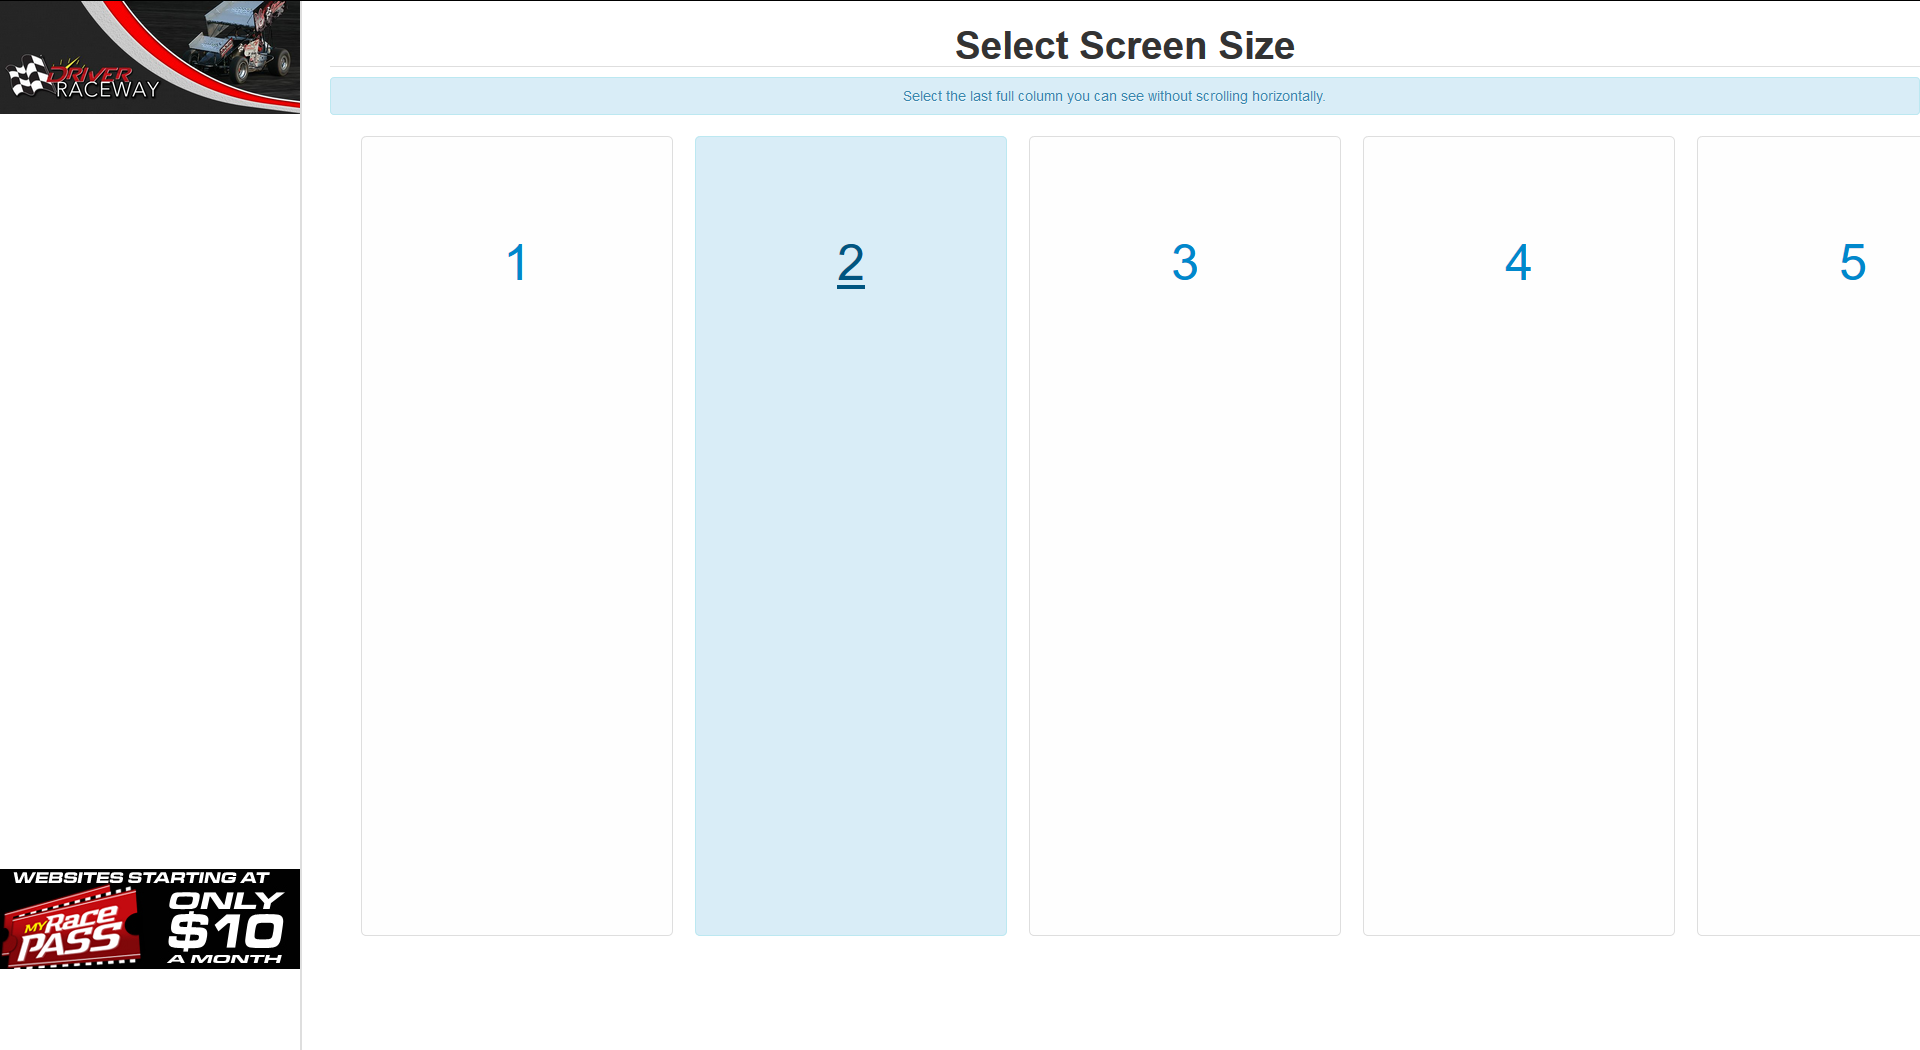 Select Screen Size